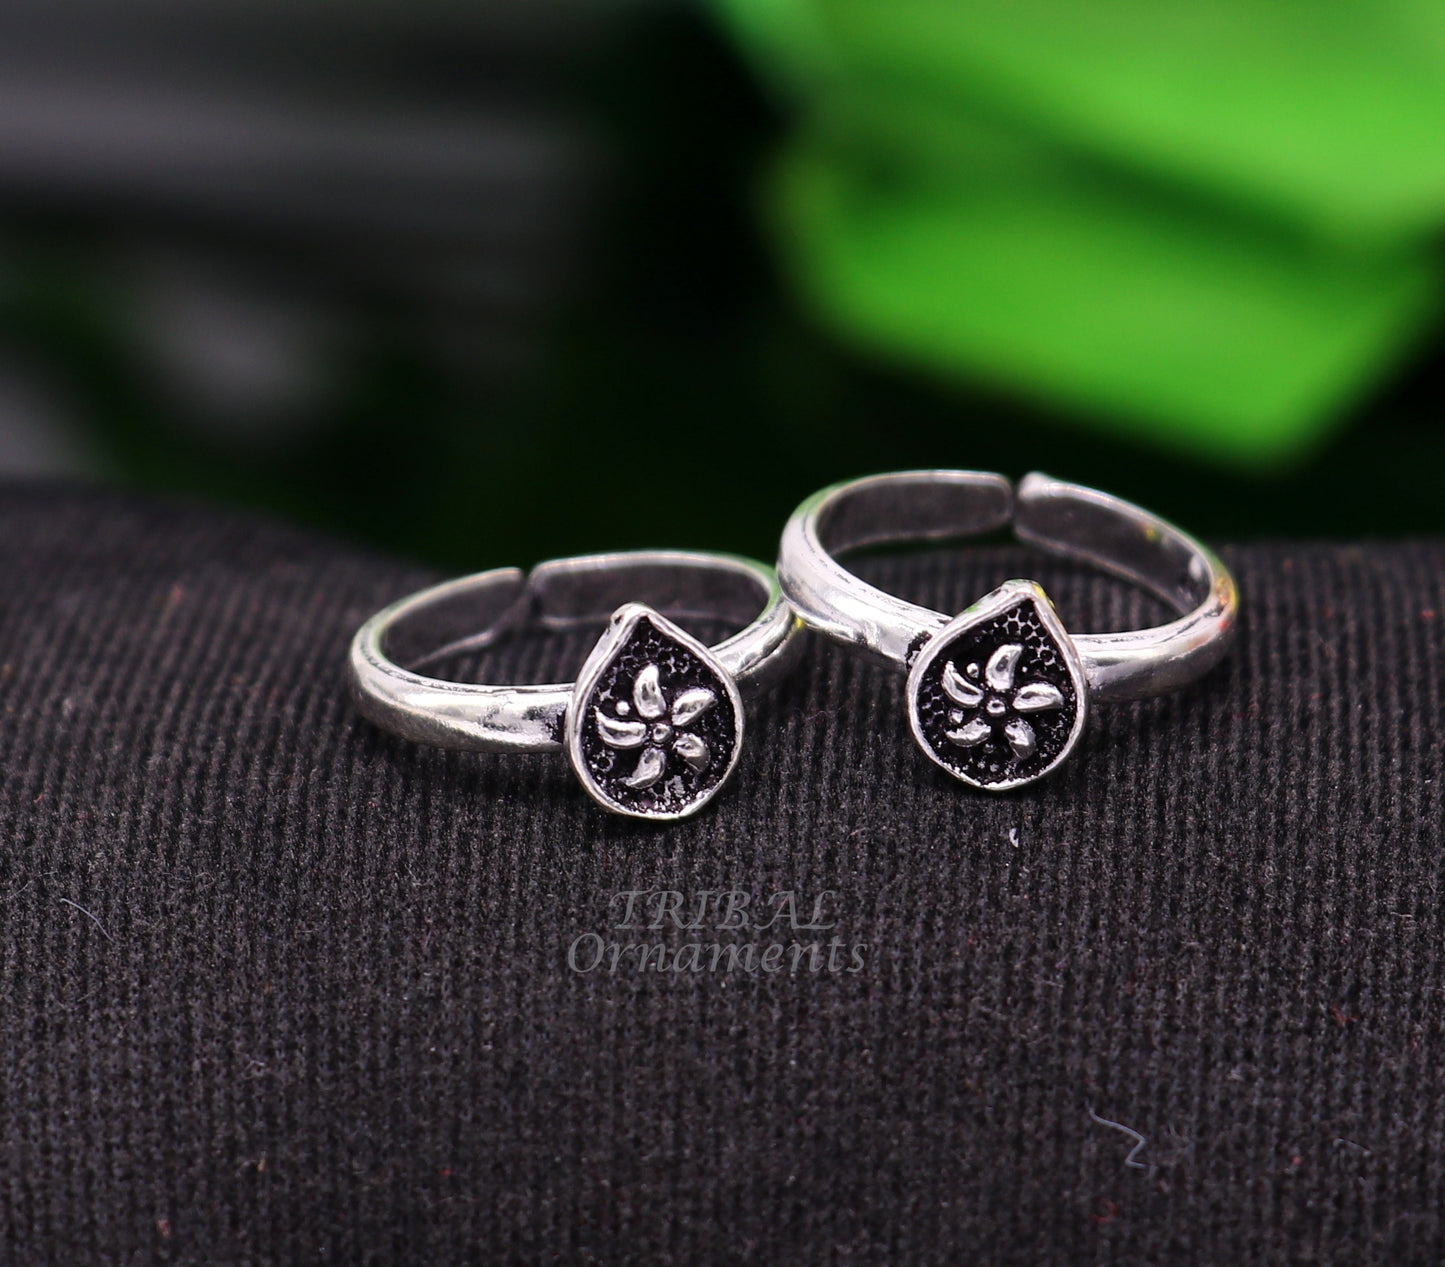 925 sterling silver handmade unique classical floral design vintage tribal ethnic toe ring best brides gifting jewelry ytr71 - TRIBAL ORNAMENTS